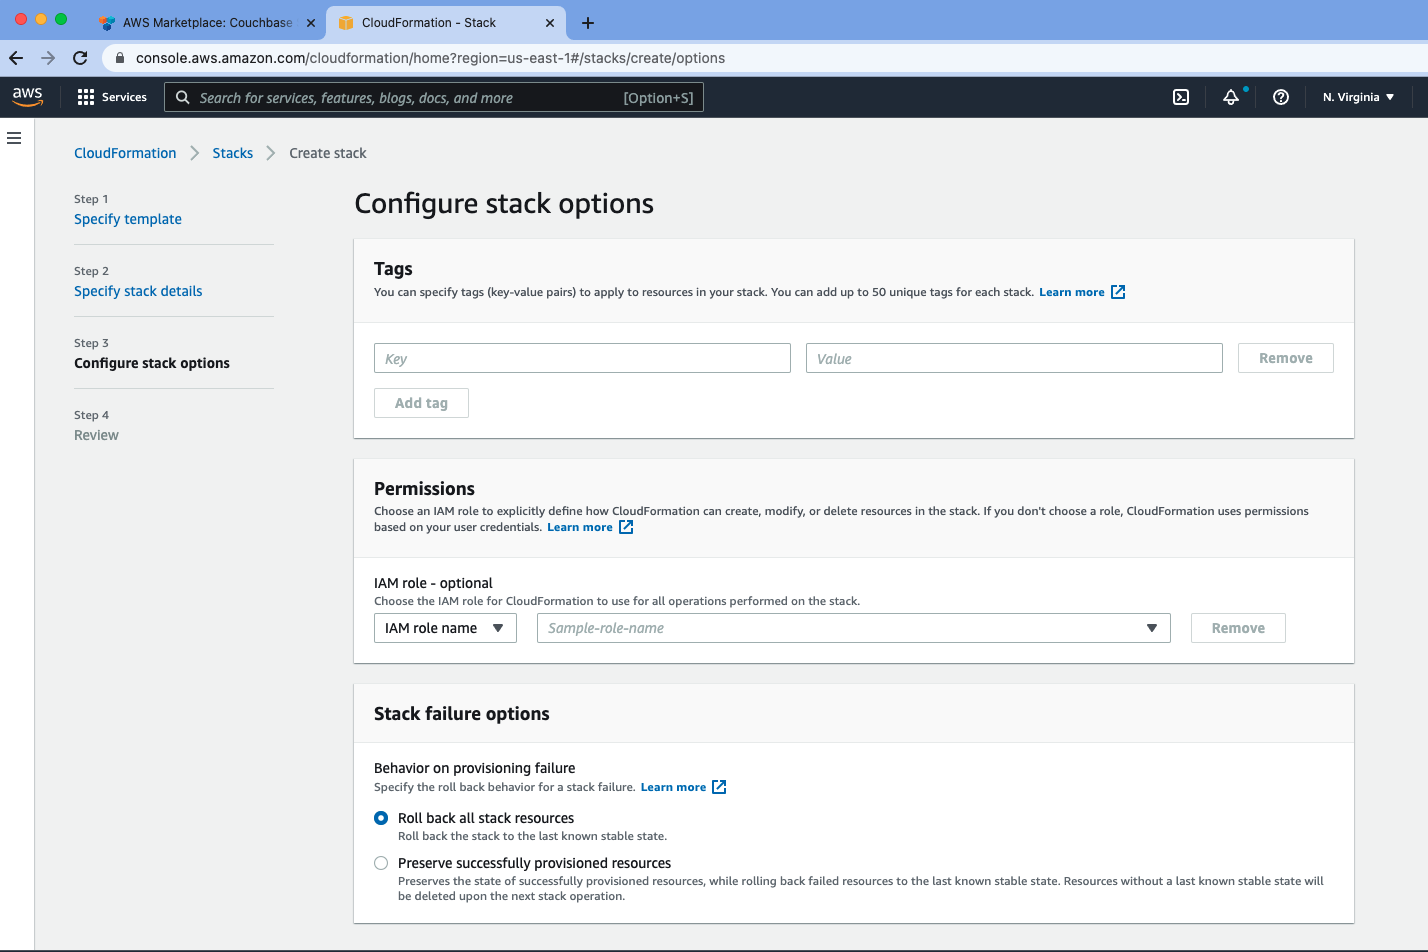 aws marketplace couchbase ee create stack options